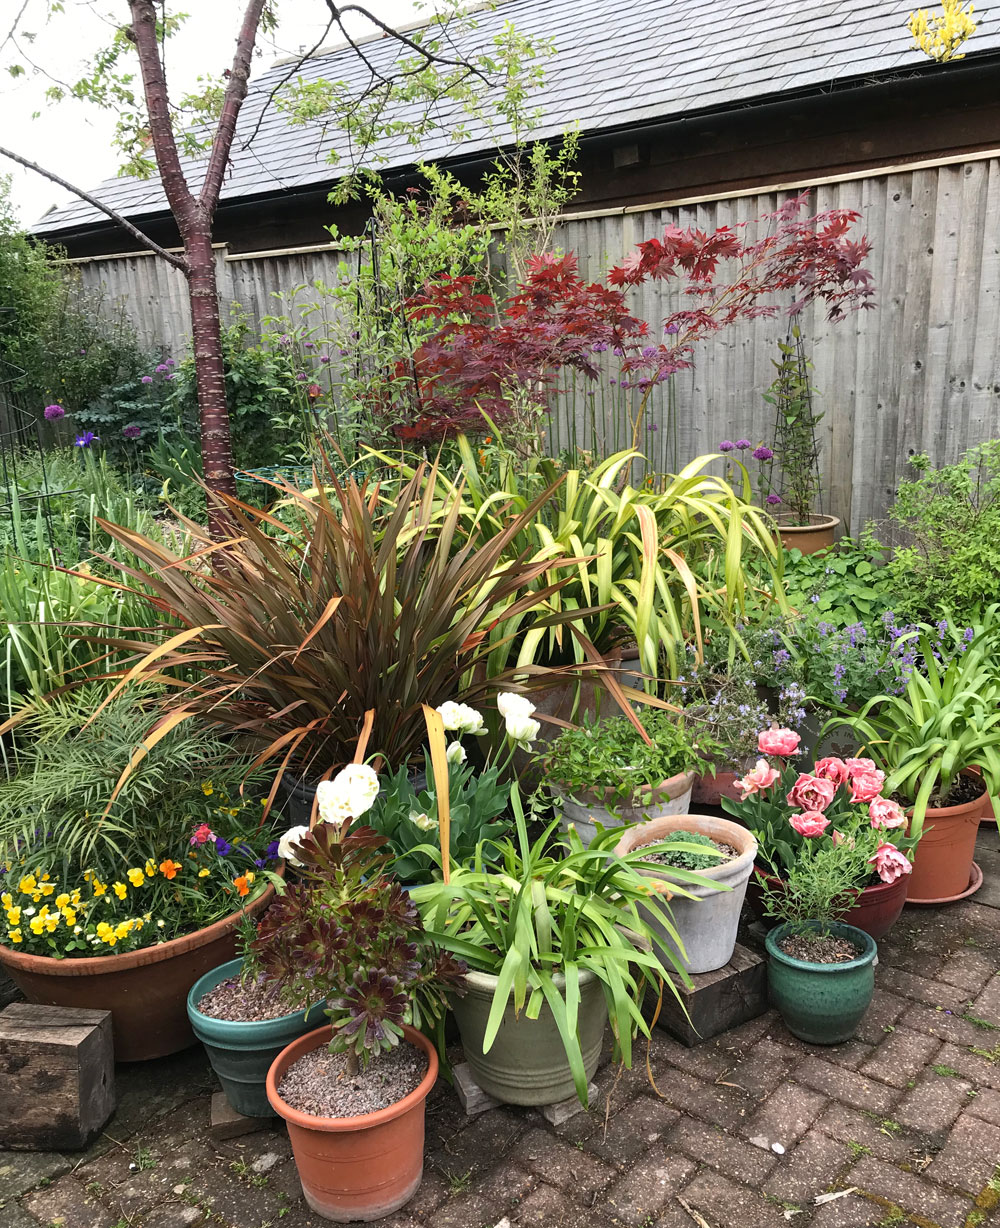 Sheelagh's pots looking lovely